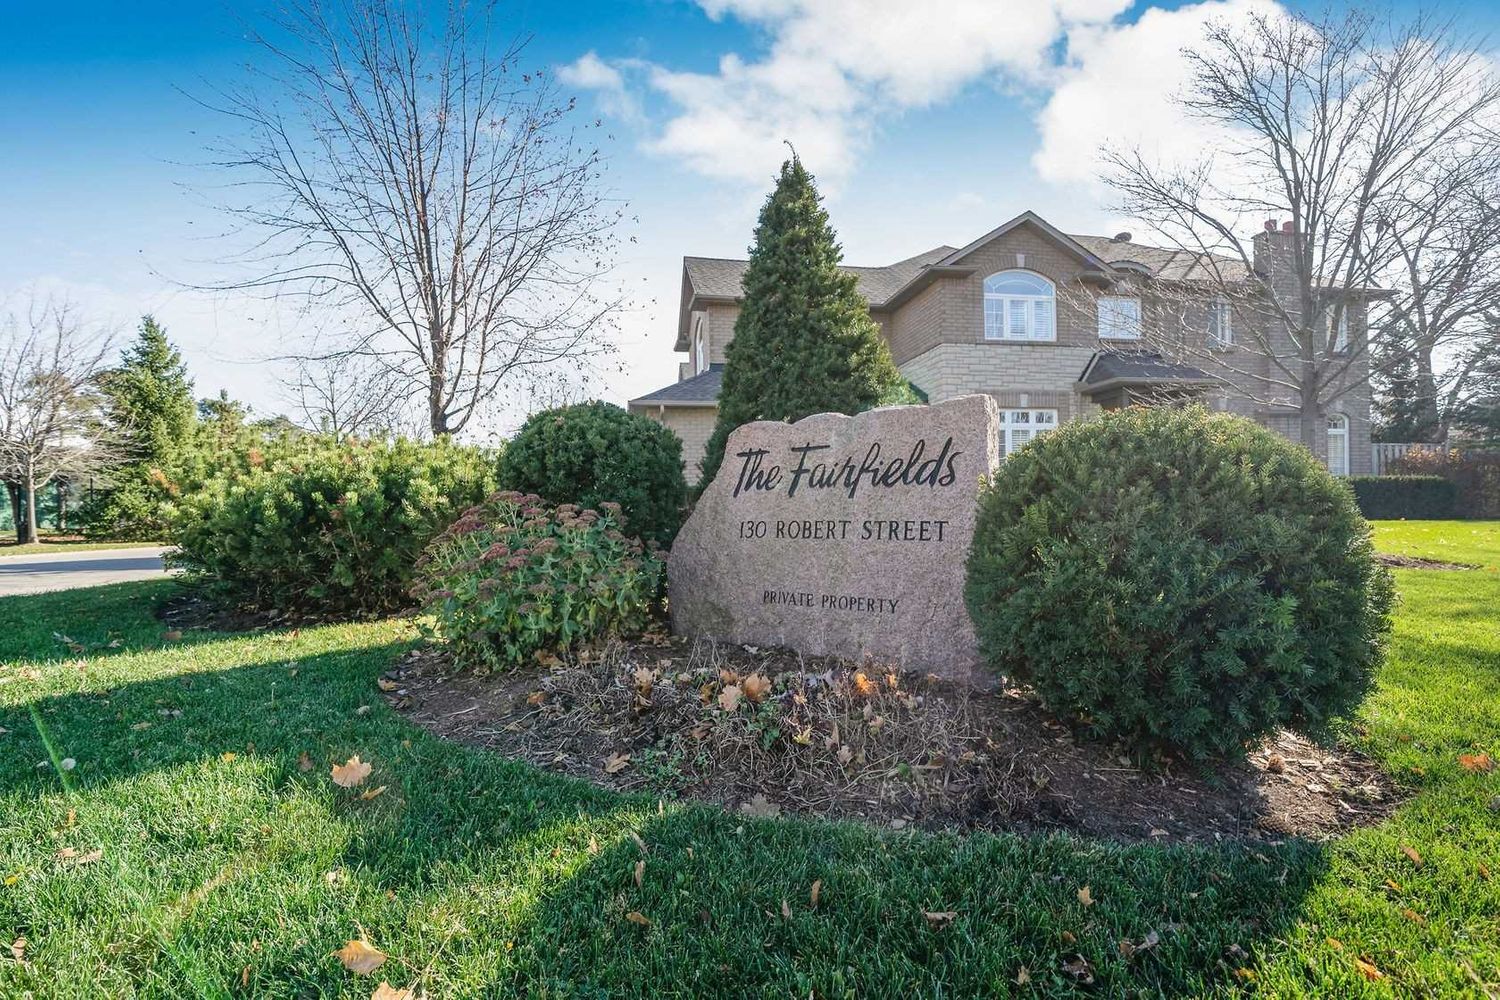 130 Robert Street. The Fairfields Townhomes is located in  Milton, Toronto - image #2 of 2